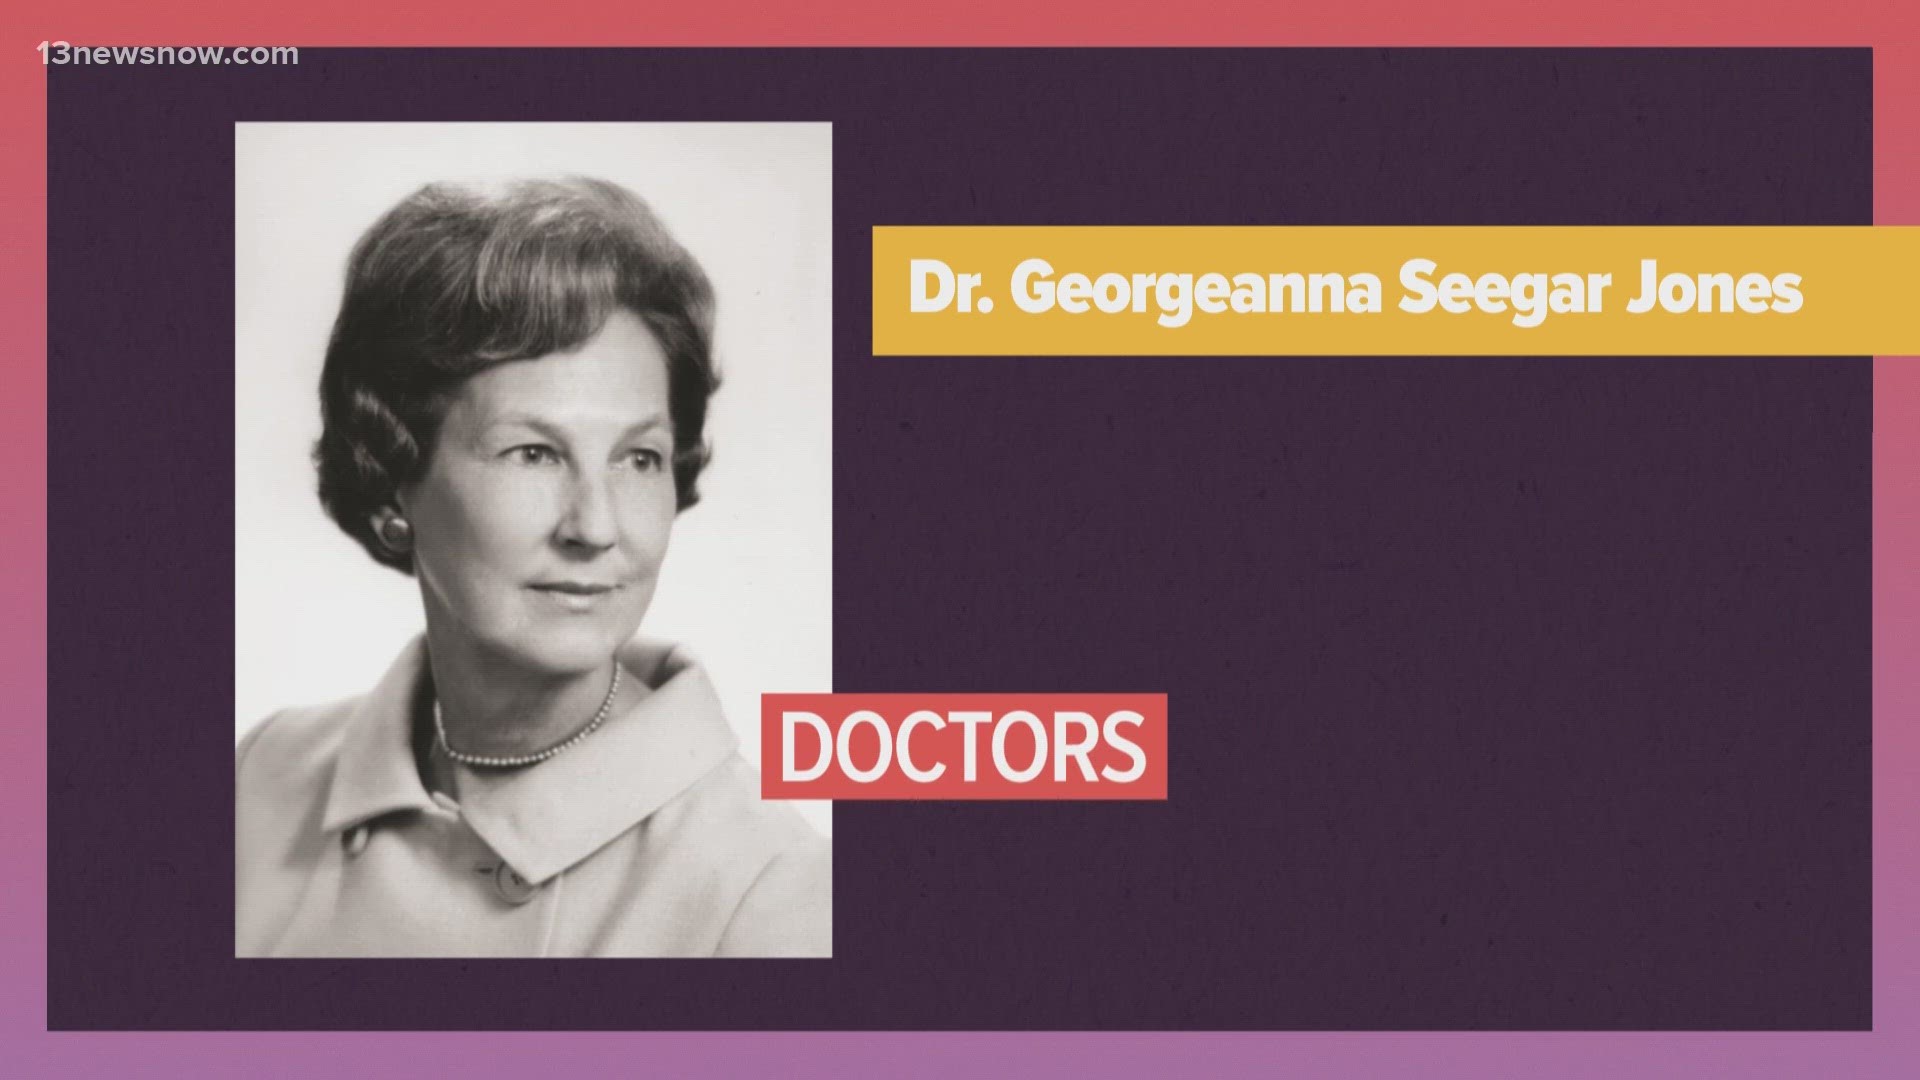 In-vitro fertilization was born over 40 years ago at EVMS, thanks to the hard work of Dr. Georgeanna Seegar Jones and her husband.